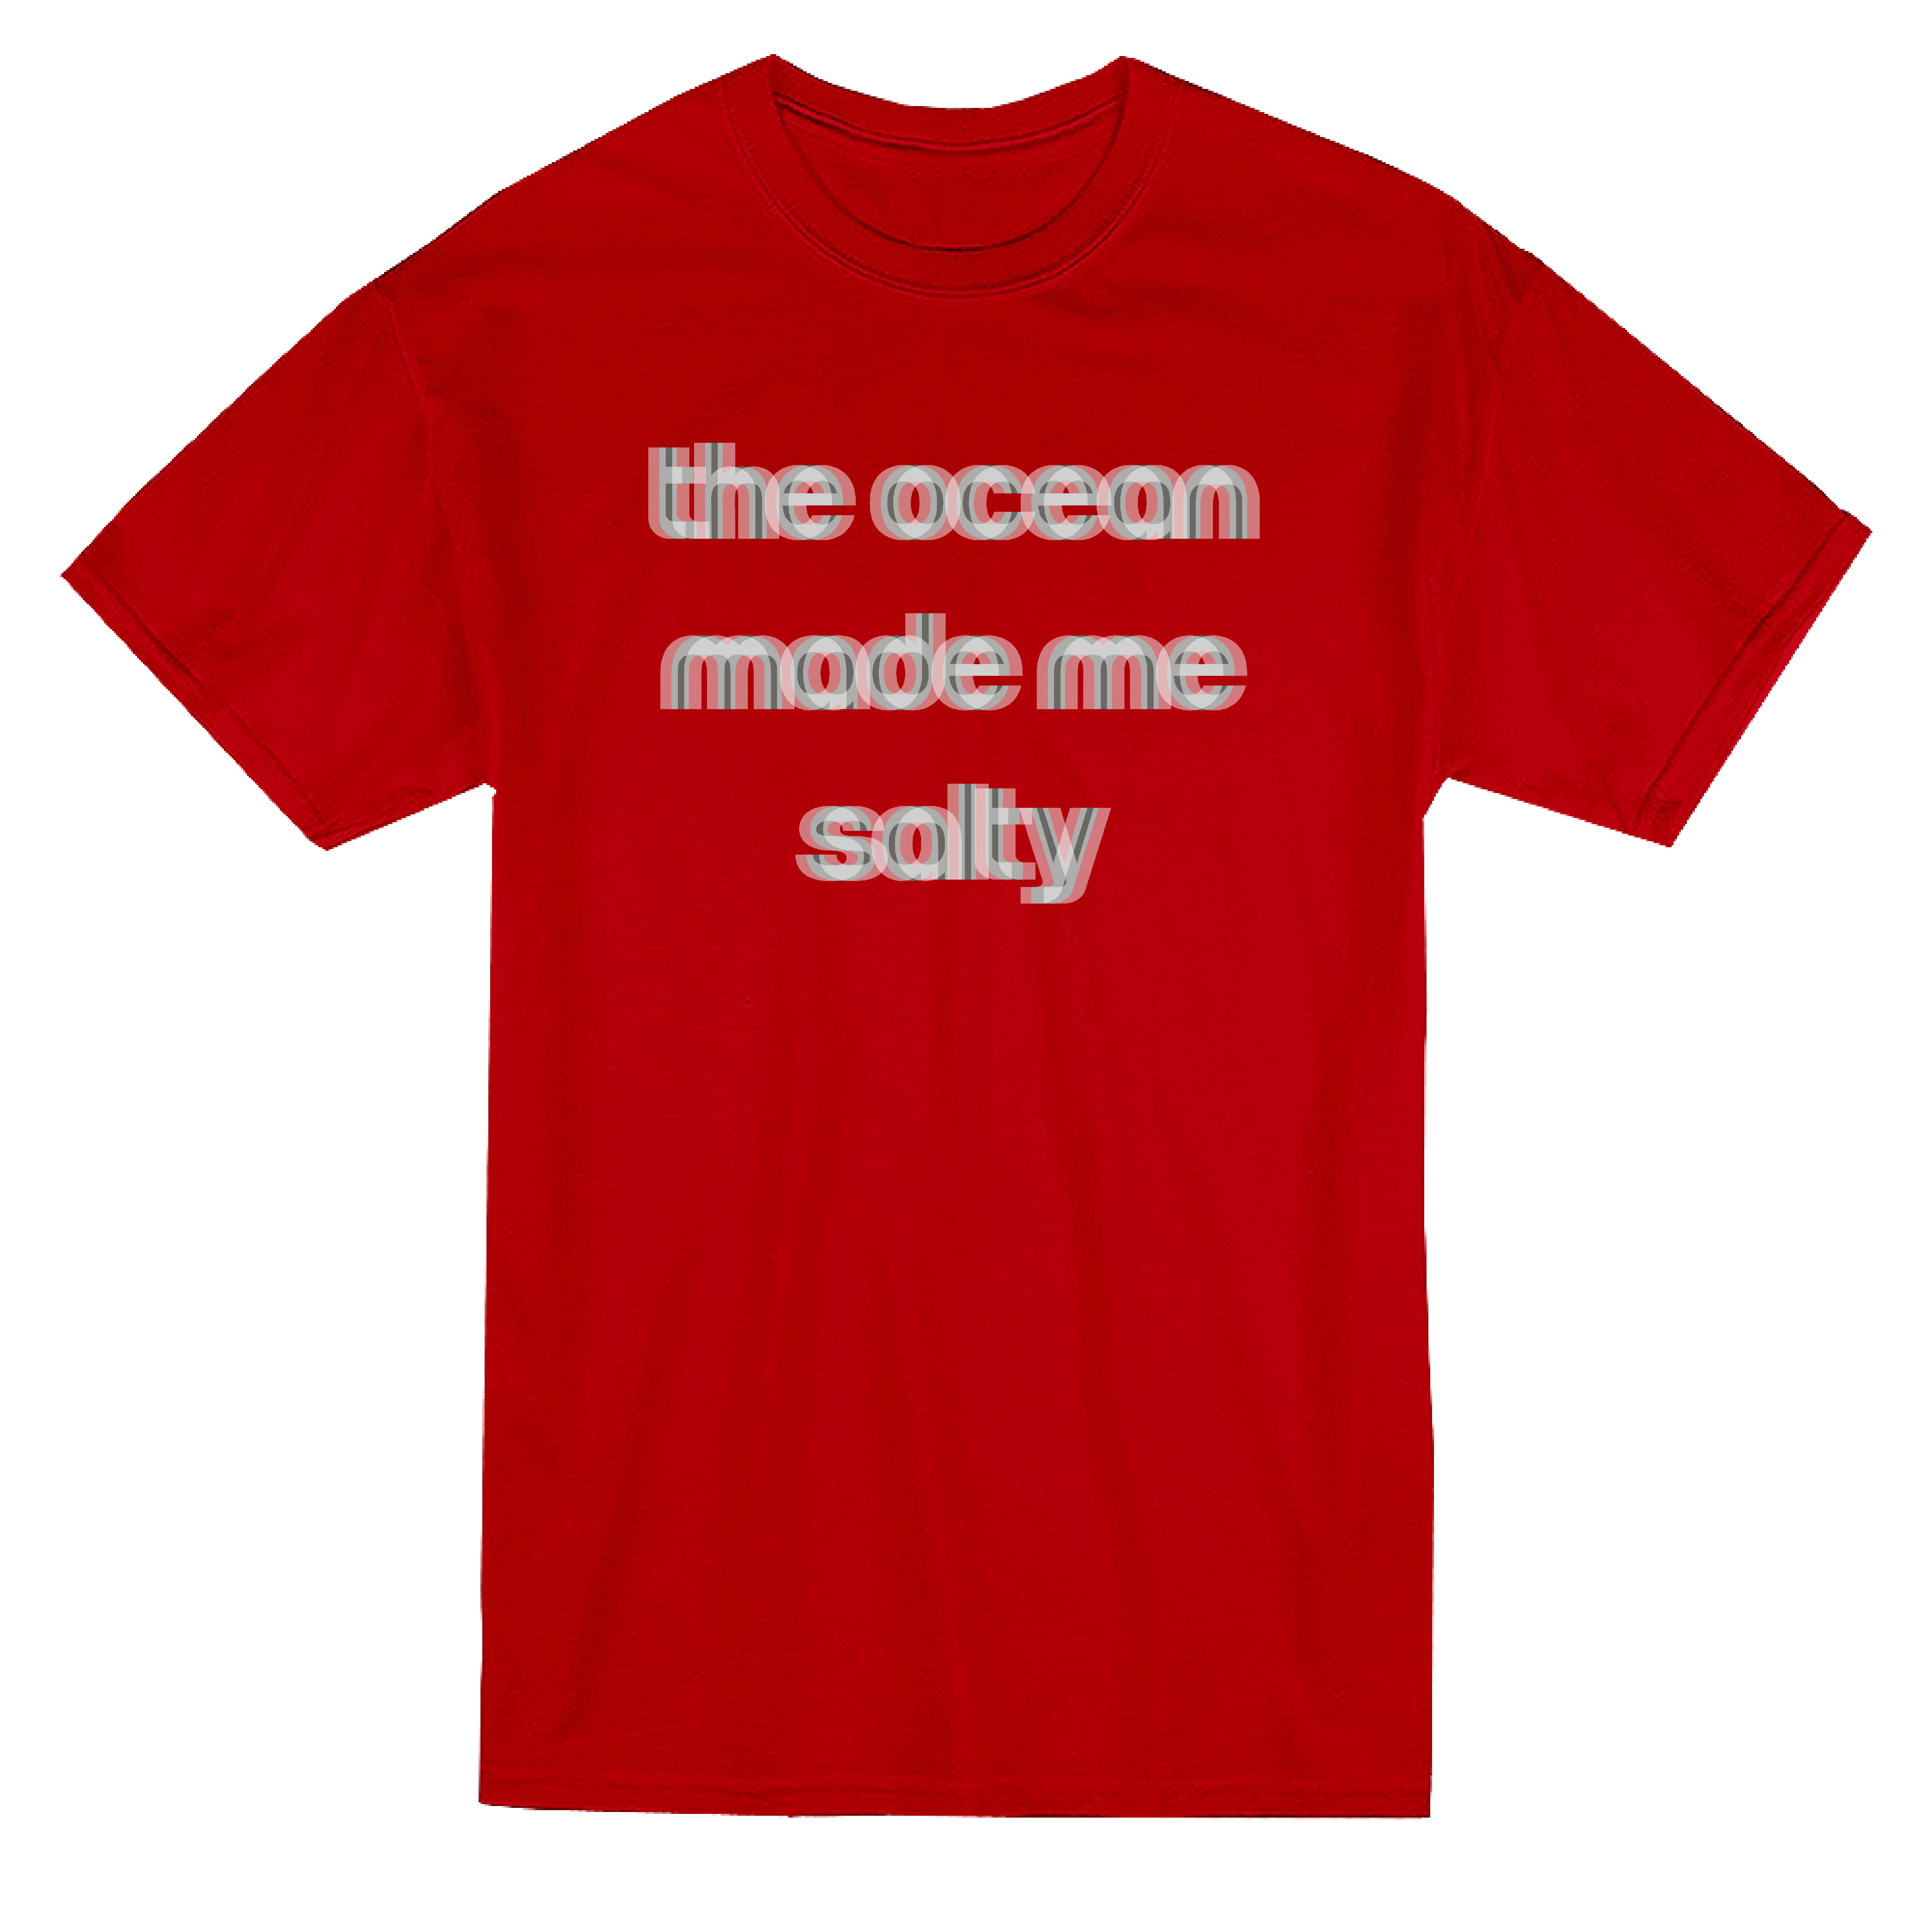 Tee Bangers - THe Ocean Made Me Salty Blurry Graphic Men's T-shirt ...